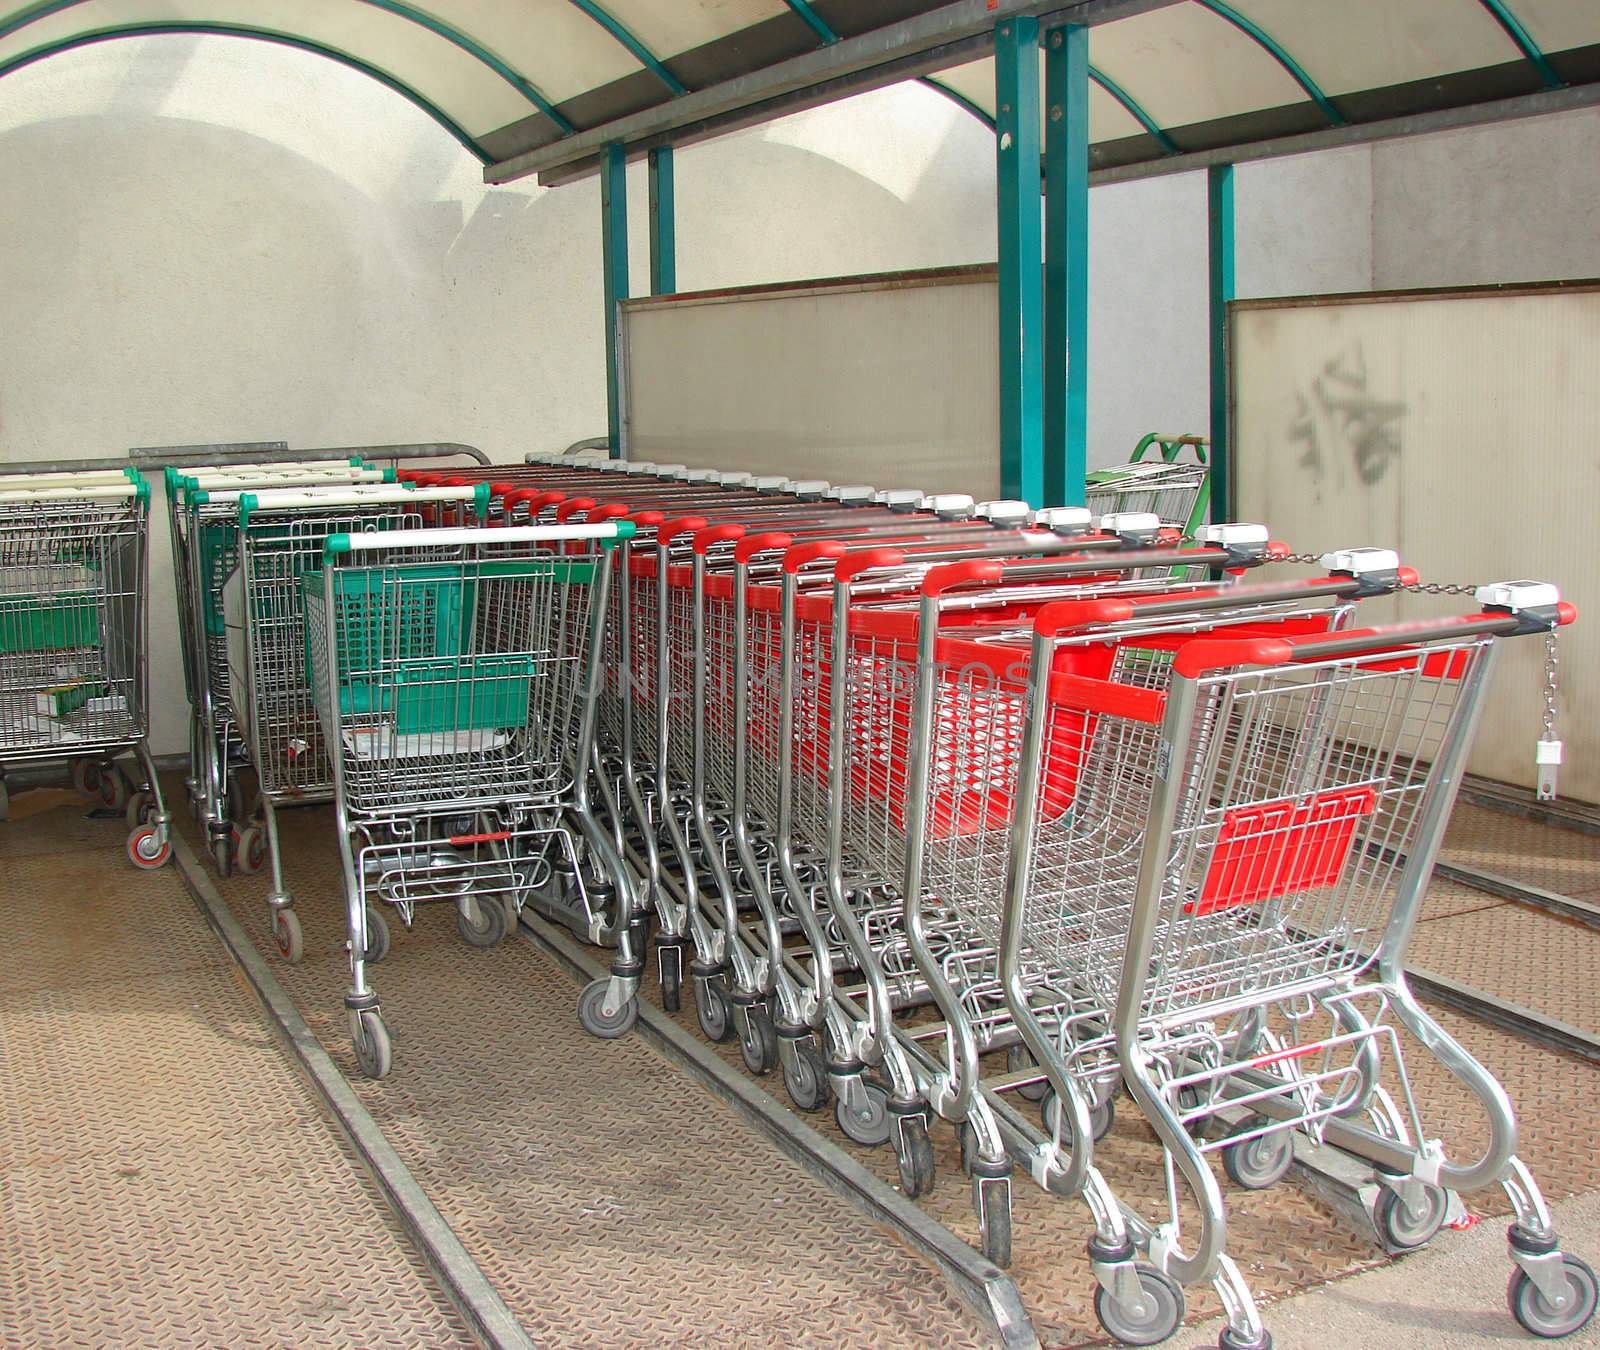 Supermarket trolleys in the rows.